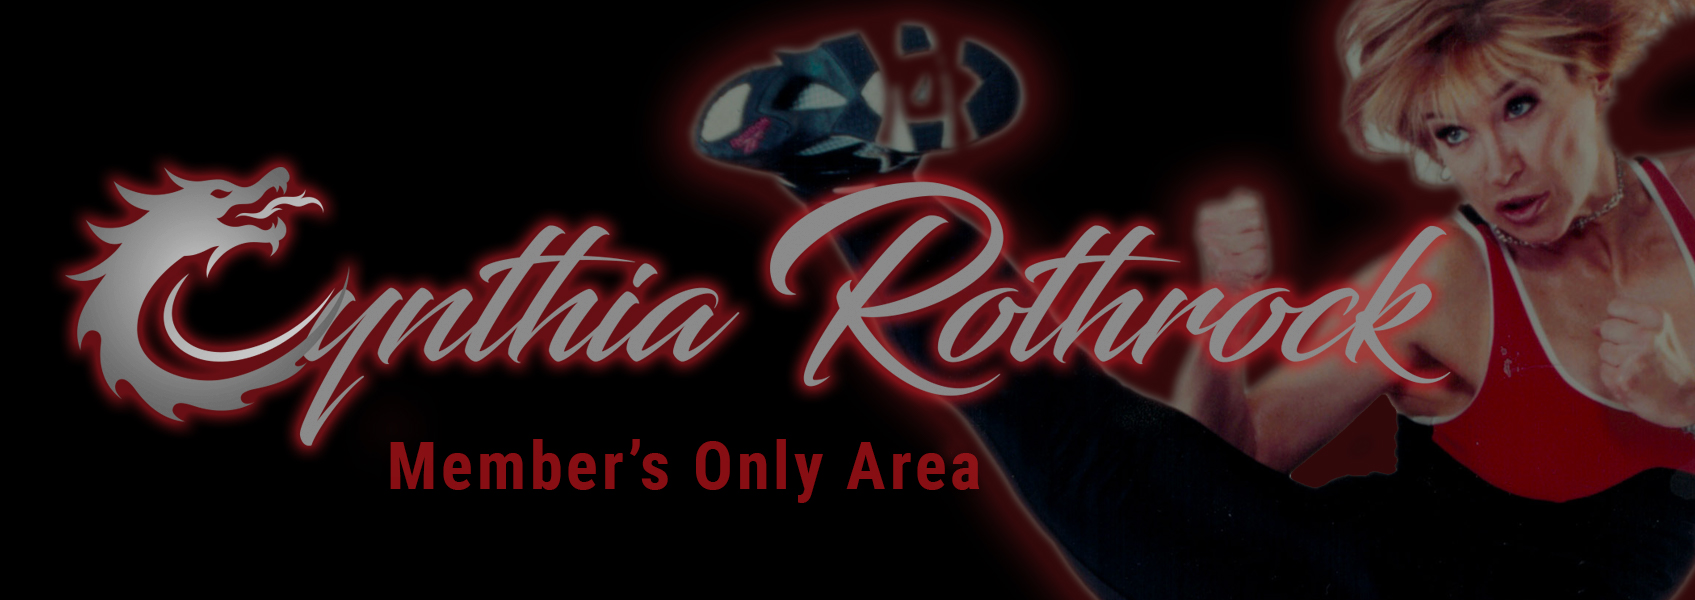 Cynthia Rothrock Member's Only Area